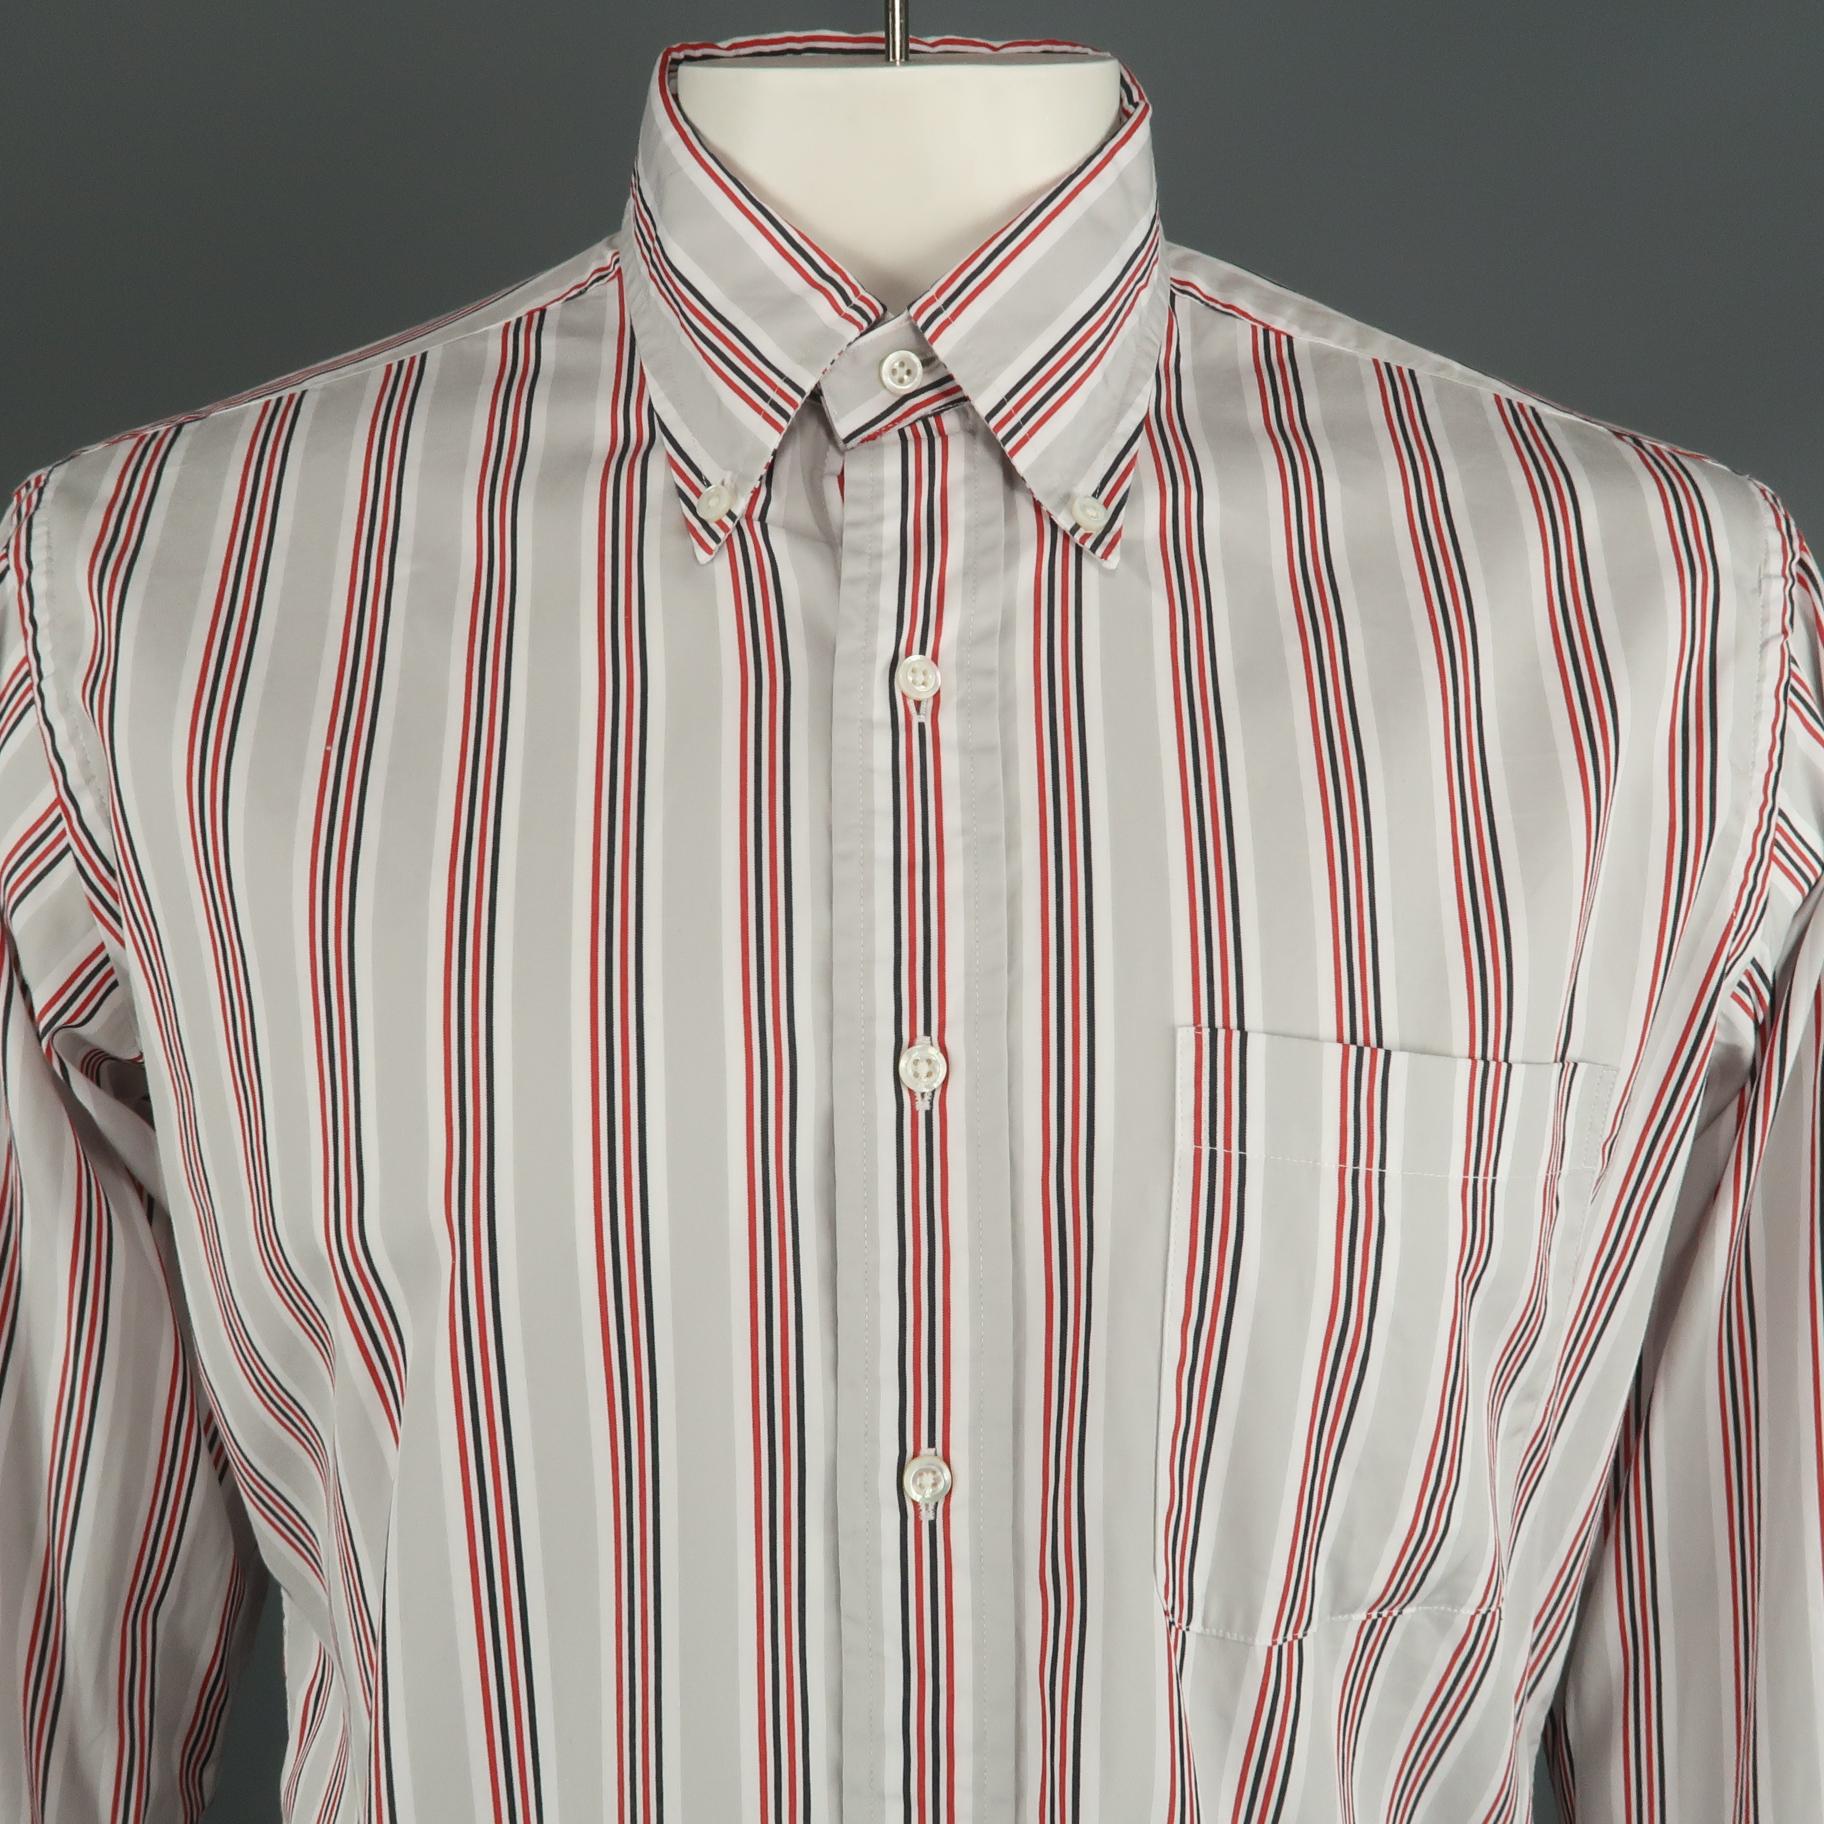 THOM BROWNE long sleeve shirt comes in a light gray striped cotton featuring a classic button down collar and a front patch pocket. Made in USA.

Excellent Pre-Owned Condition.
Marked: 5

Measurements:

l Shoulder: 18 in.
l Chest: 48 in.
l Sleeve: